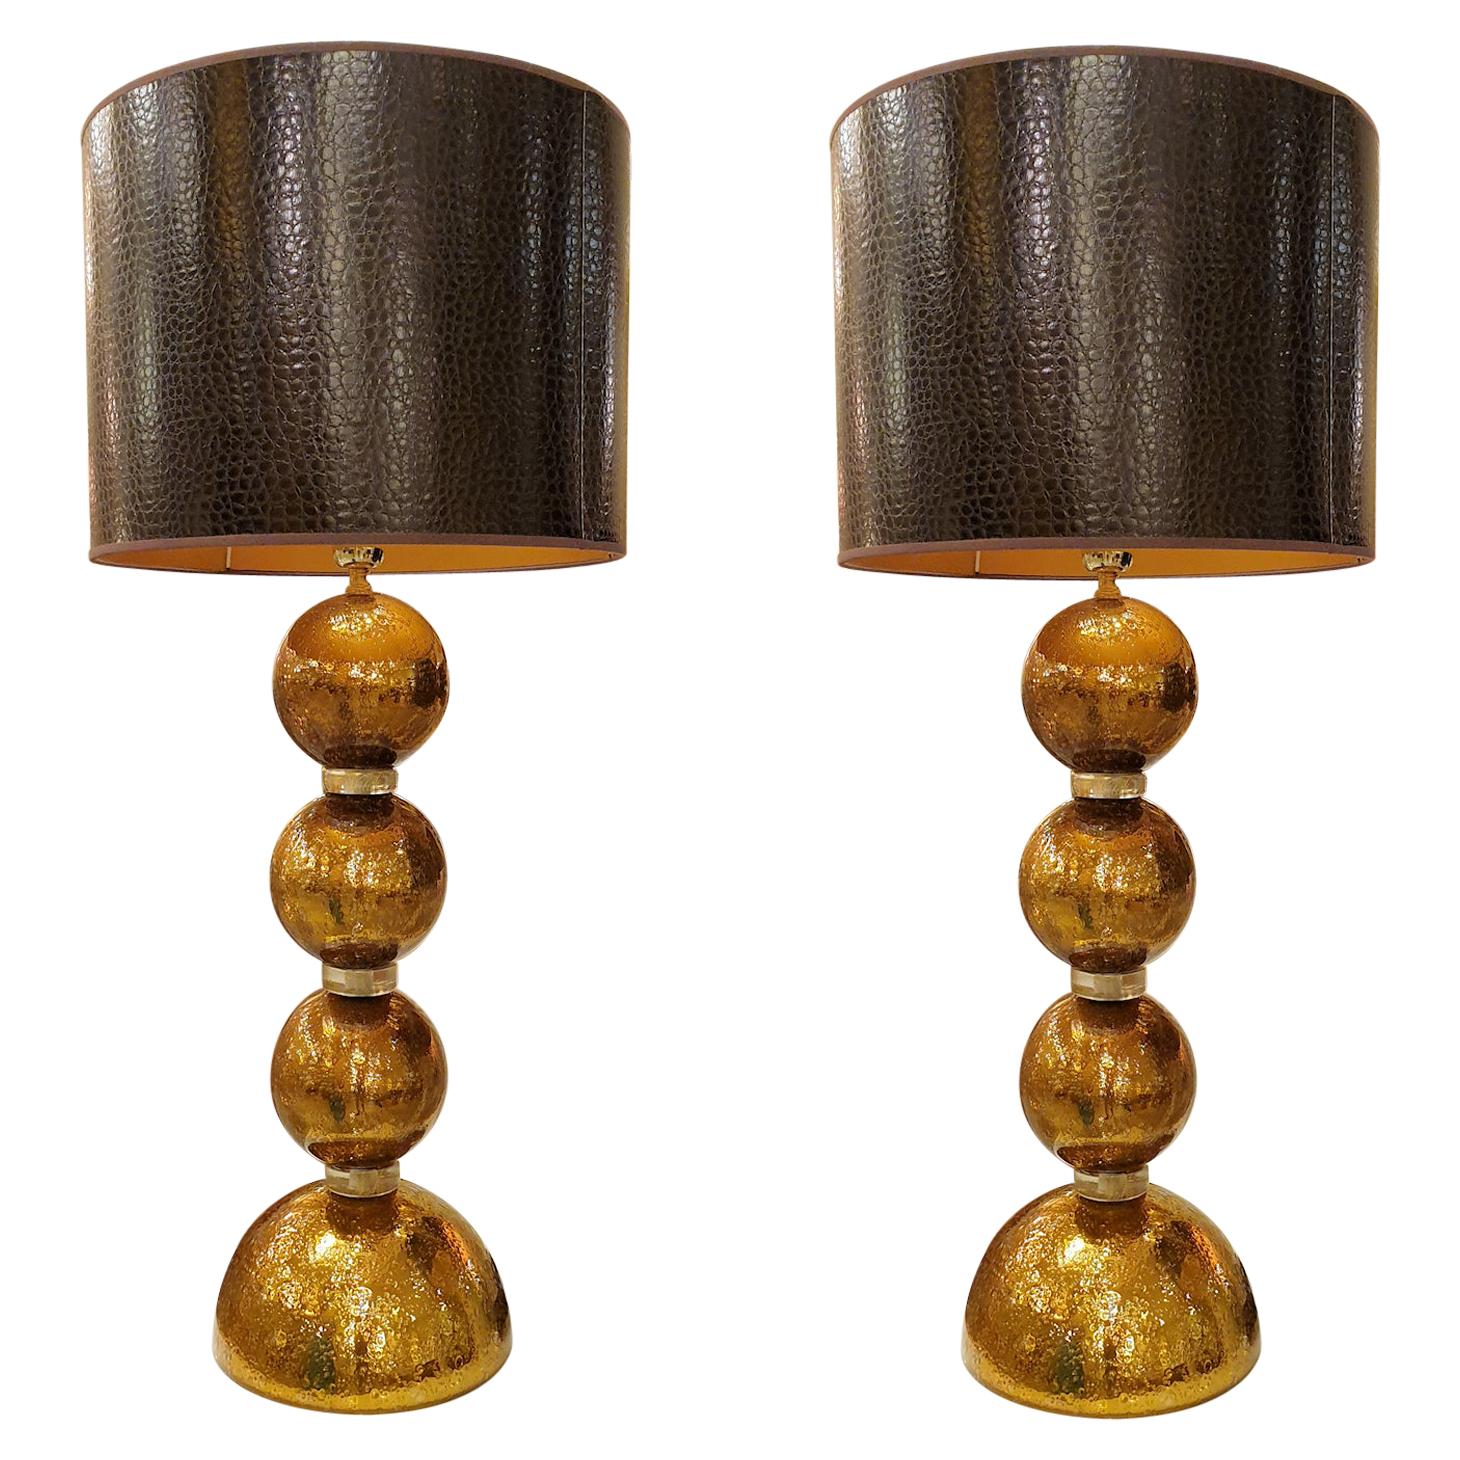 Large Pair Gold Murano Glass Table Lamps, Mid-Century Modern, Mazzega Style 1970